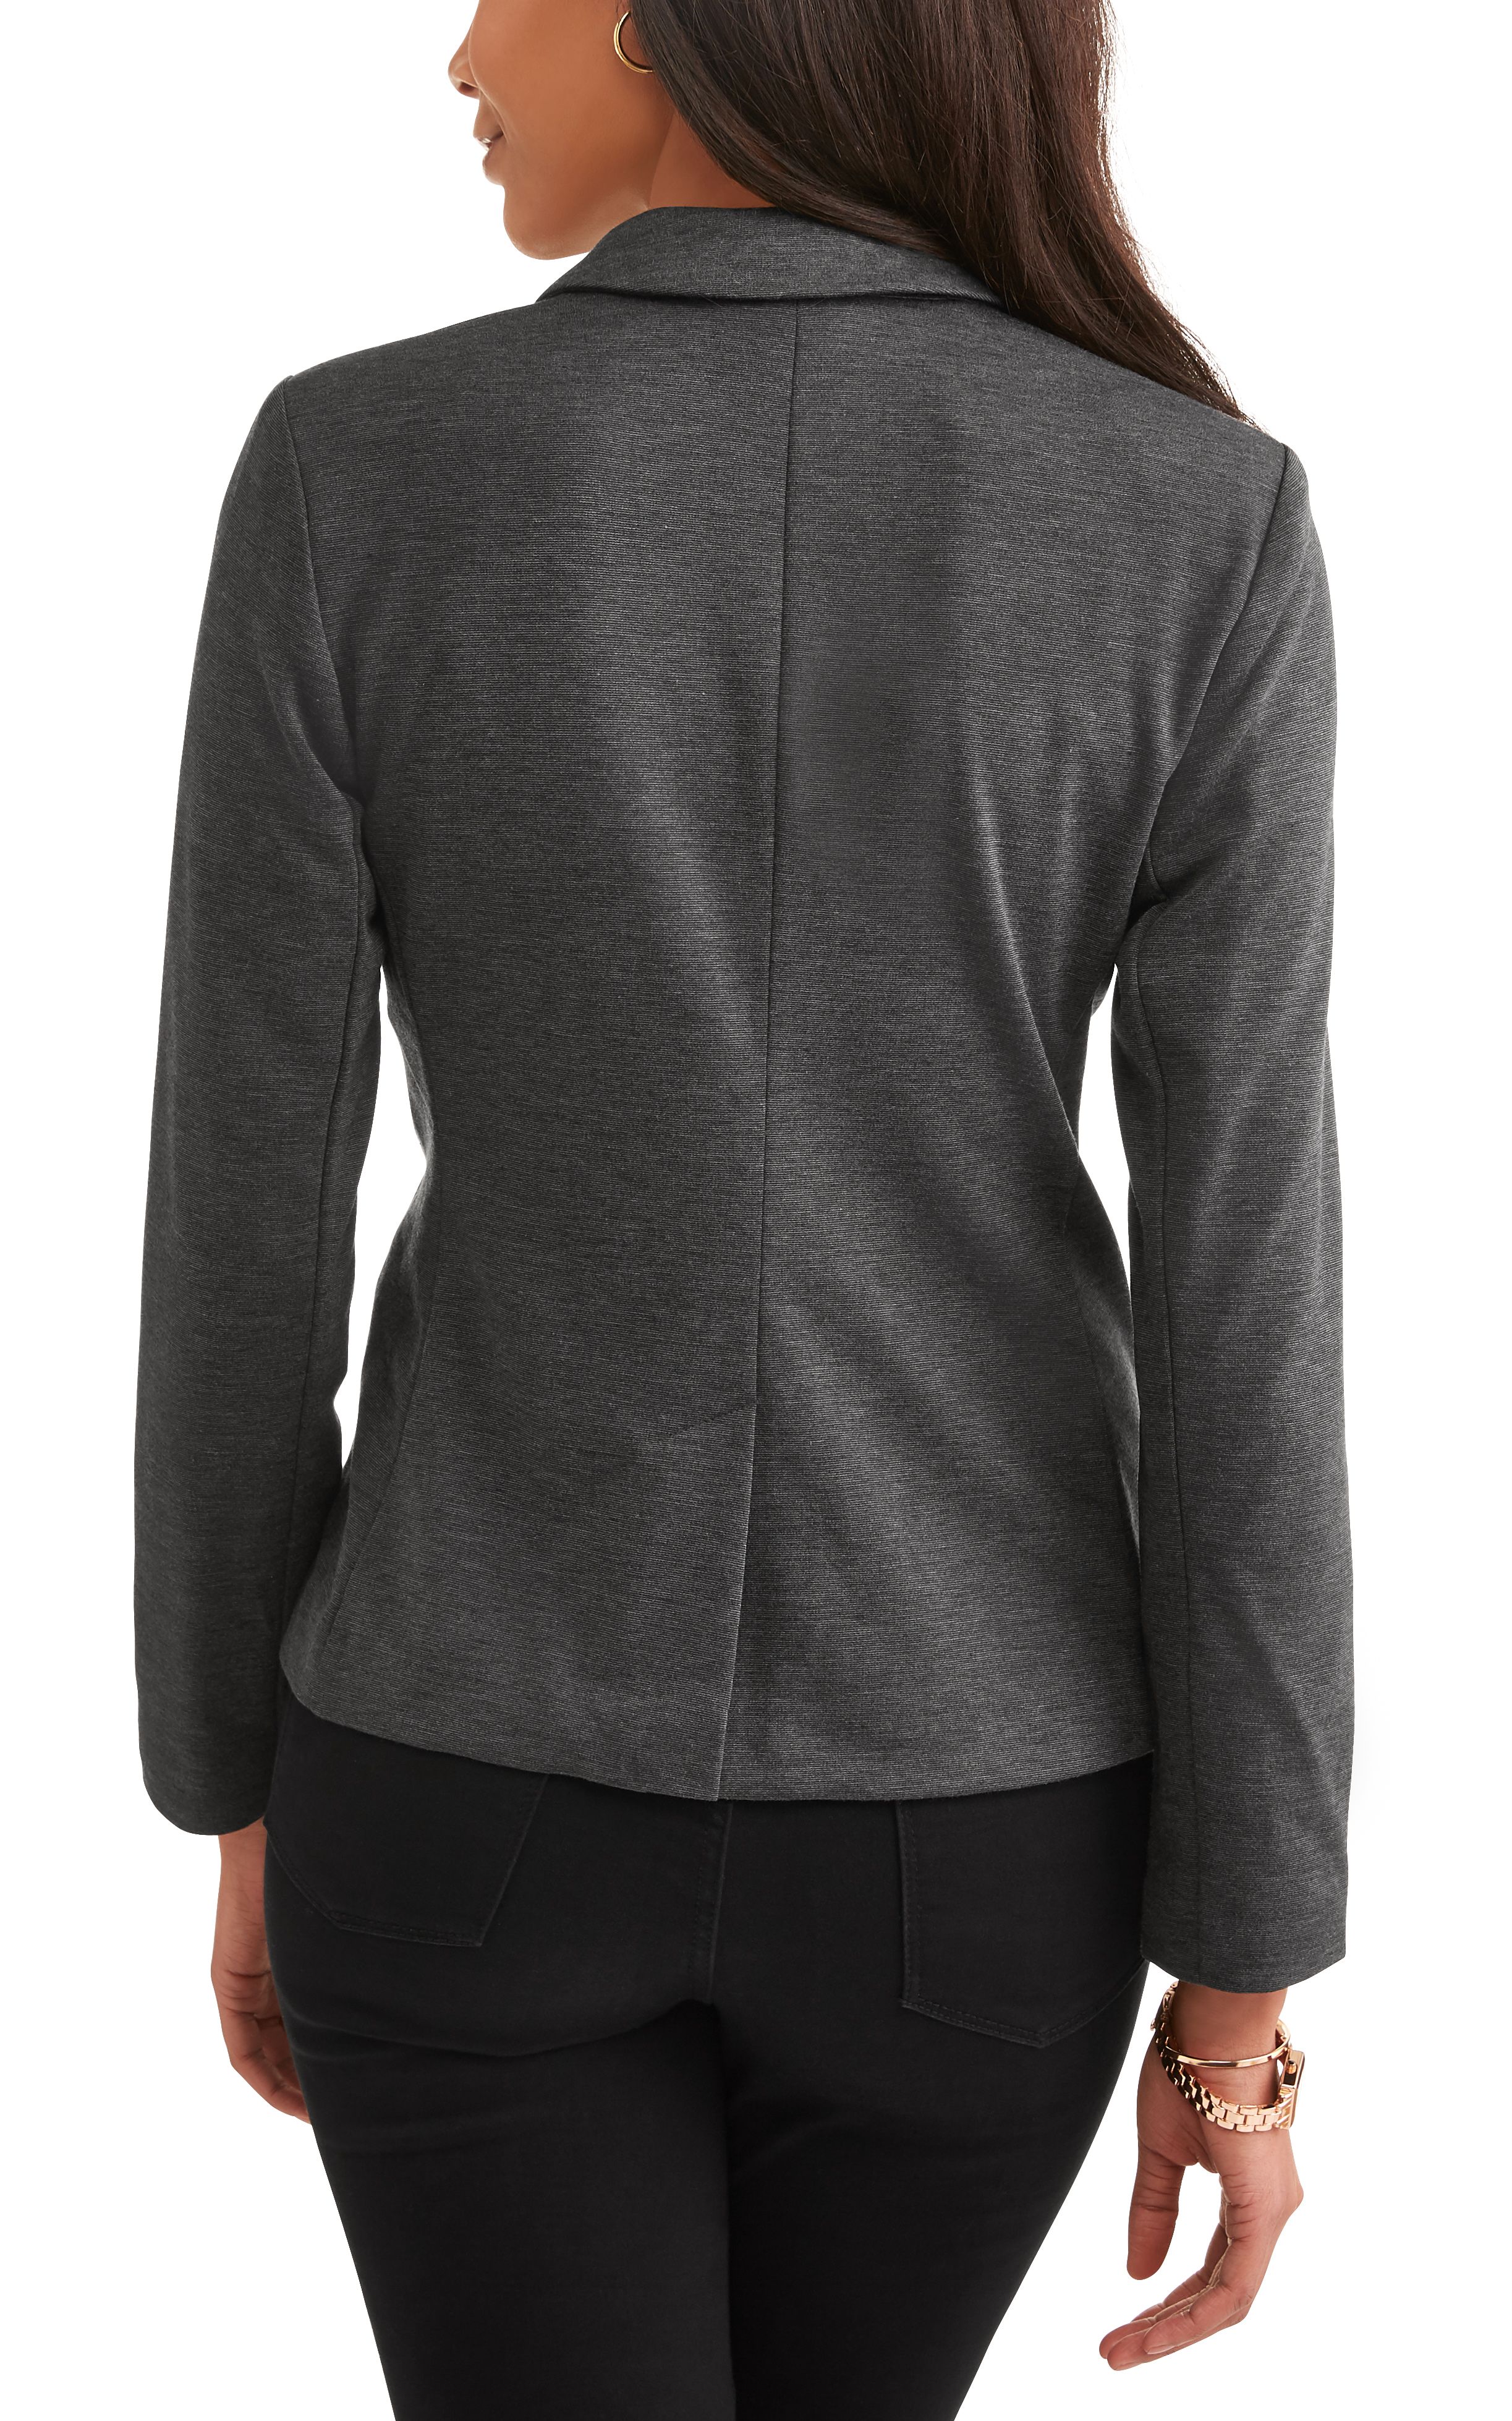 Women's Ponte Suiting Jacket - image 2 of 5